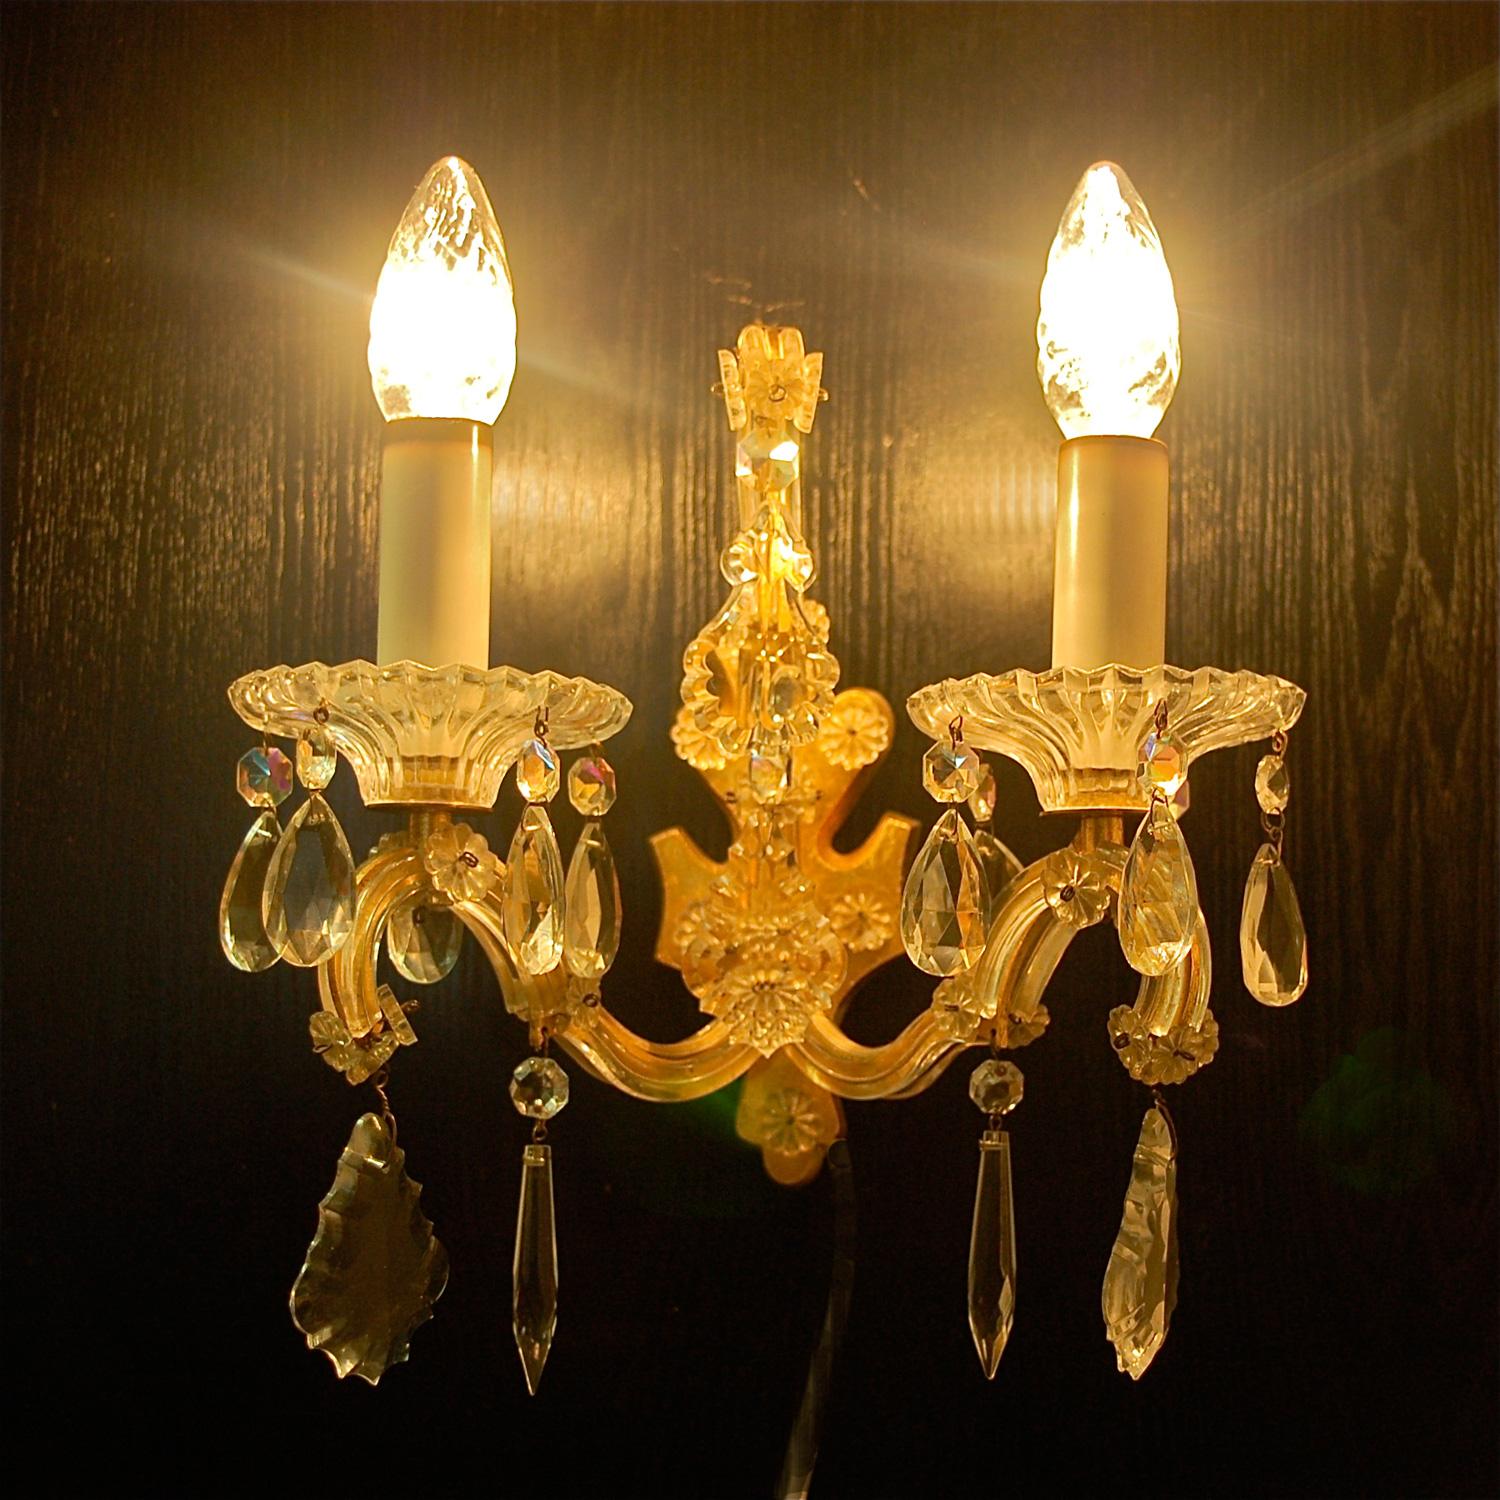 Pair of Palme & Walter KG Crystal Wall Sconces, 1960s Germany For Sale 1